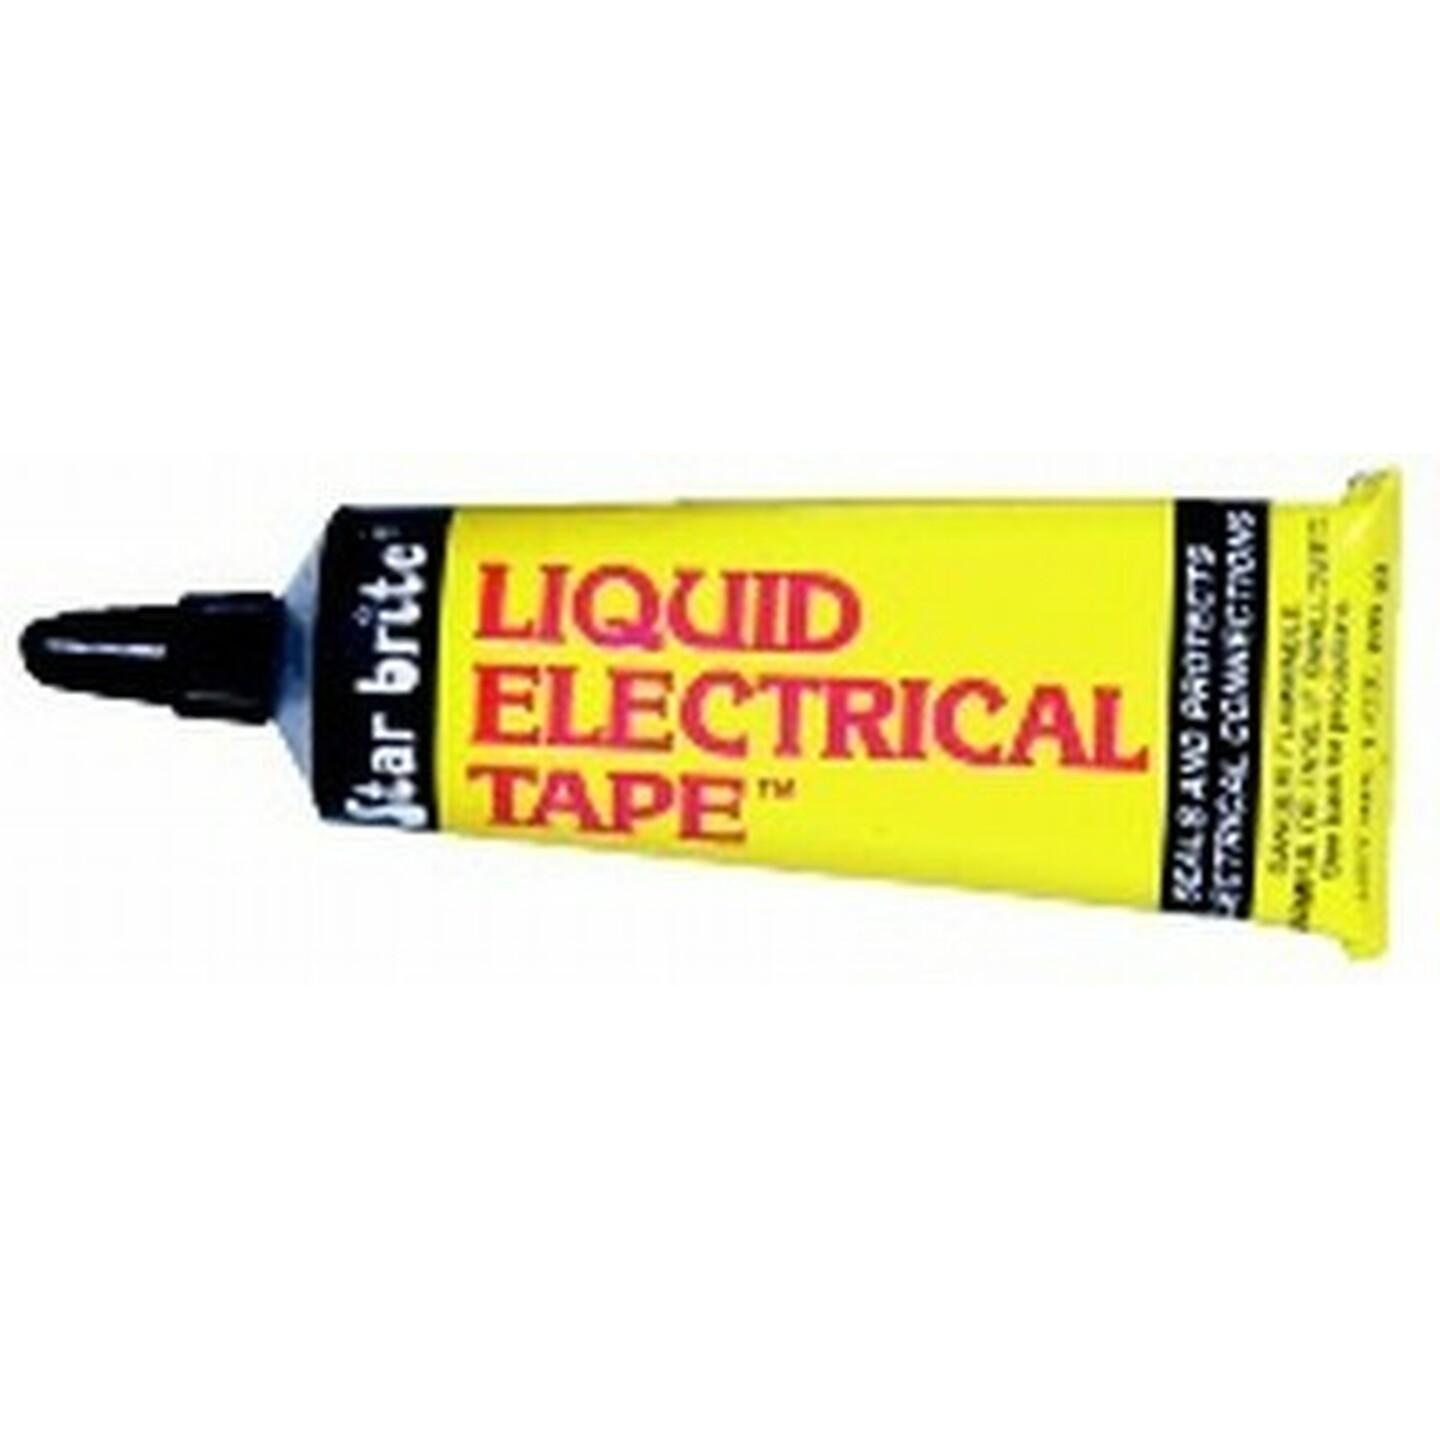 Liquid Electrical Tape - Tube - Red 28g